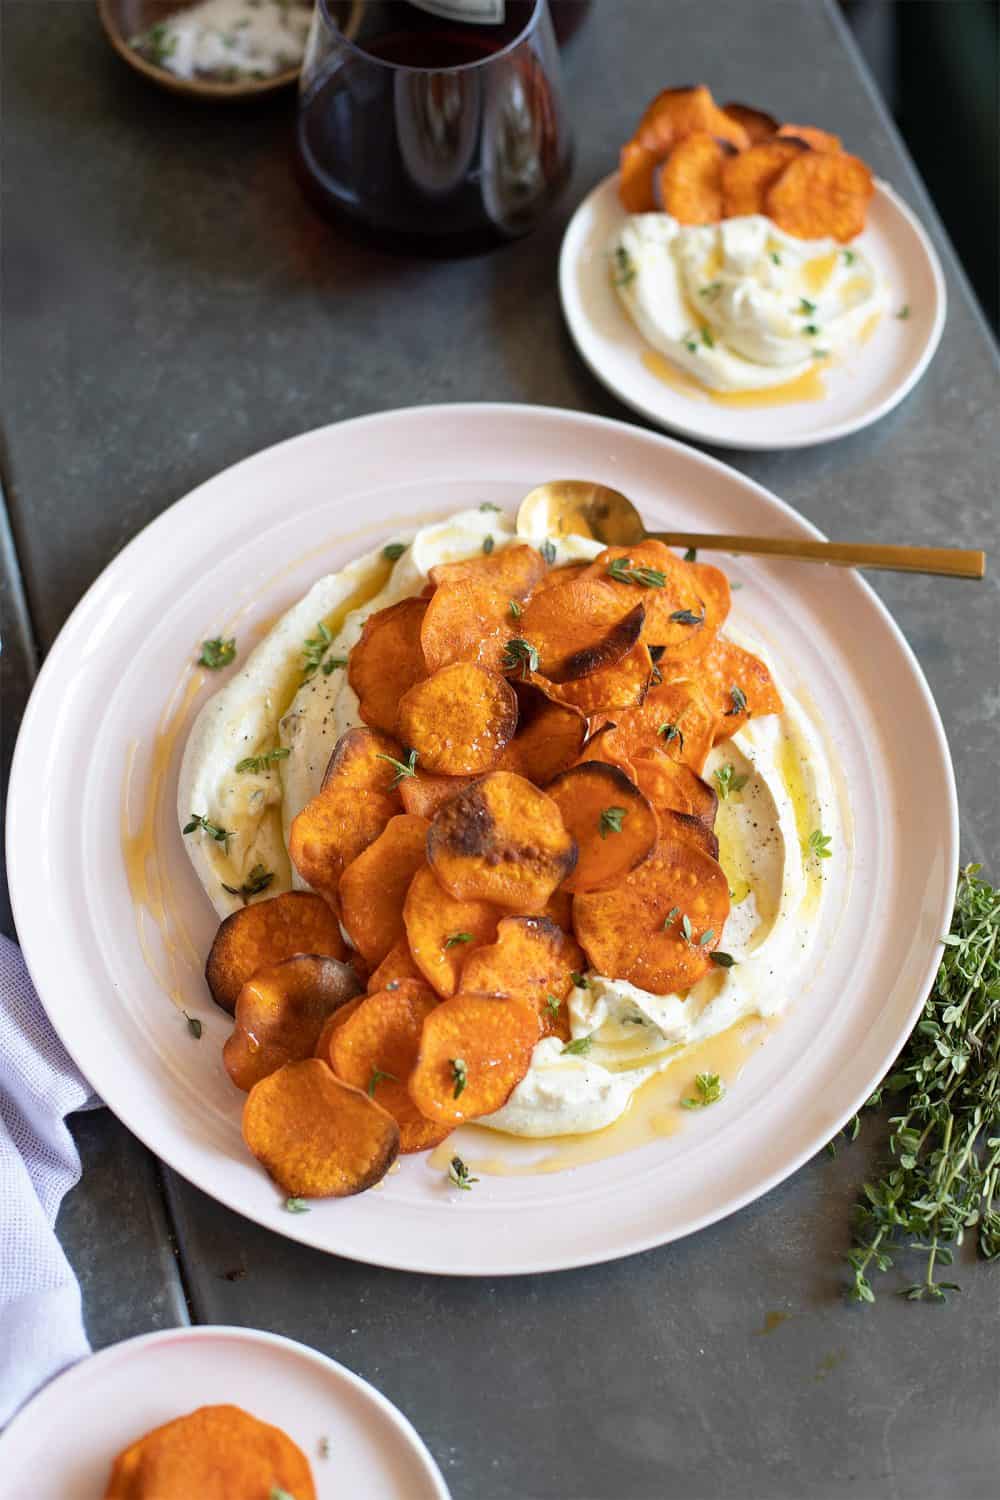 Sweet Potato Chips with Whipped Goat Cheese - Salt & WInd